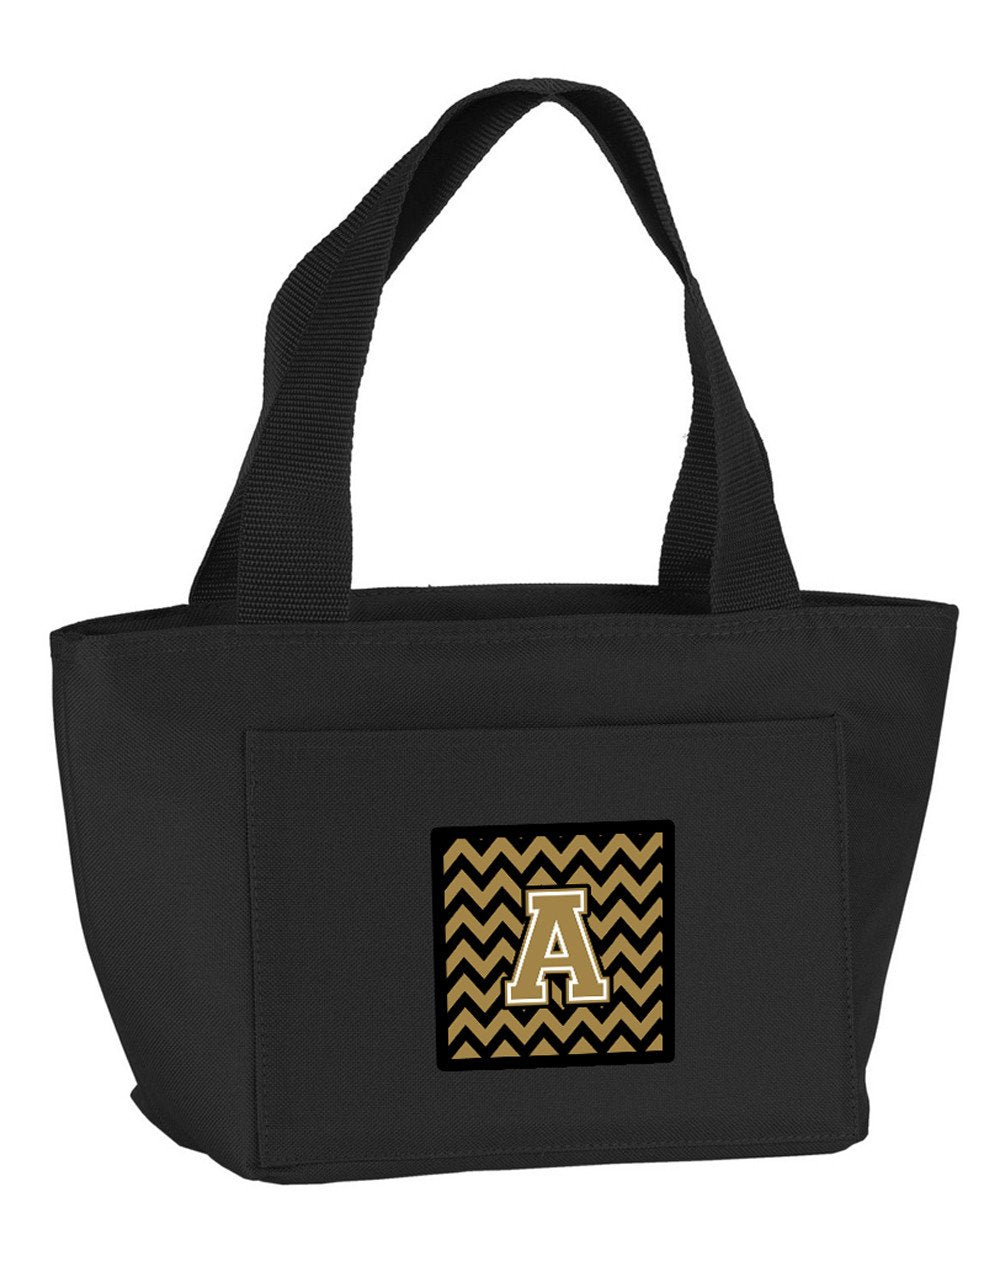 Letter A Chevron Black and Gold  Lunch Bag CJ1050-ABK-8808 by Caroline's Treasures